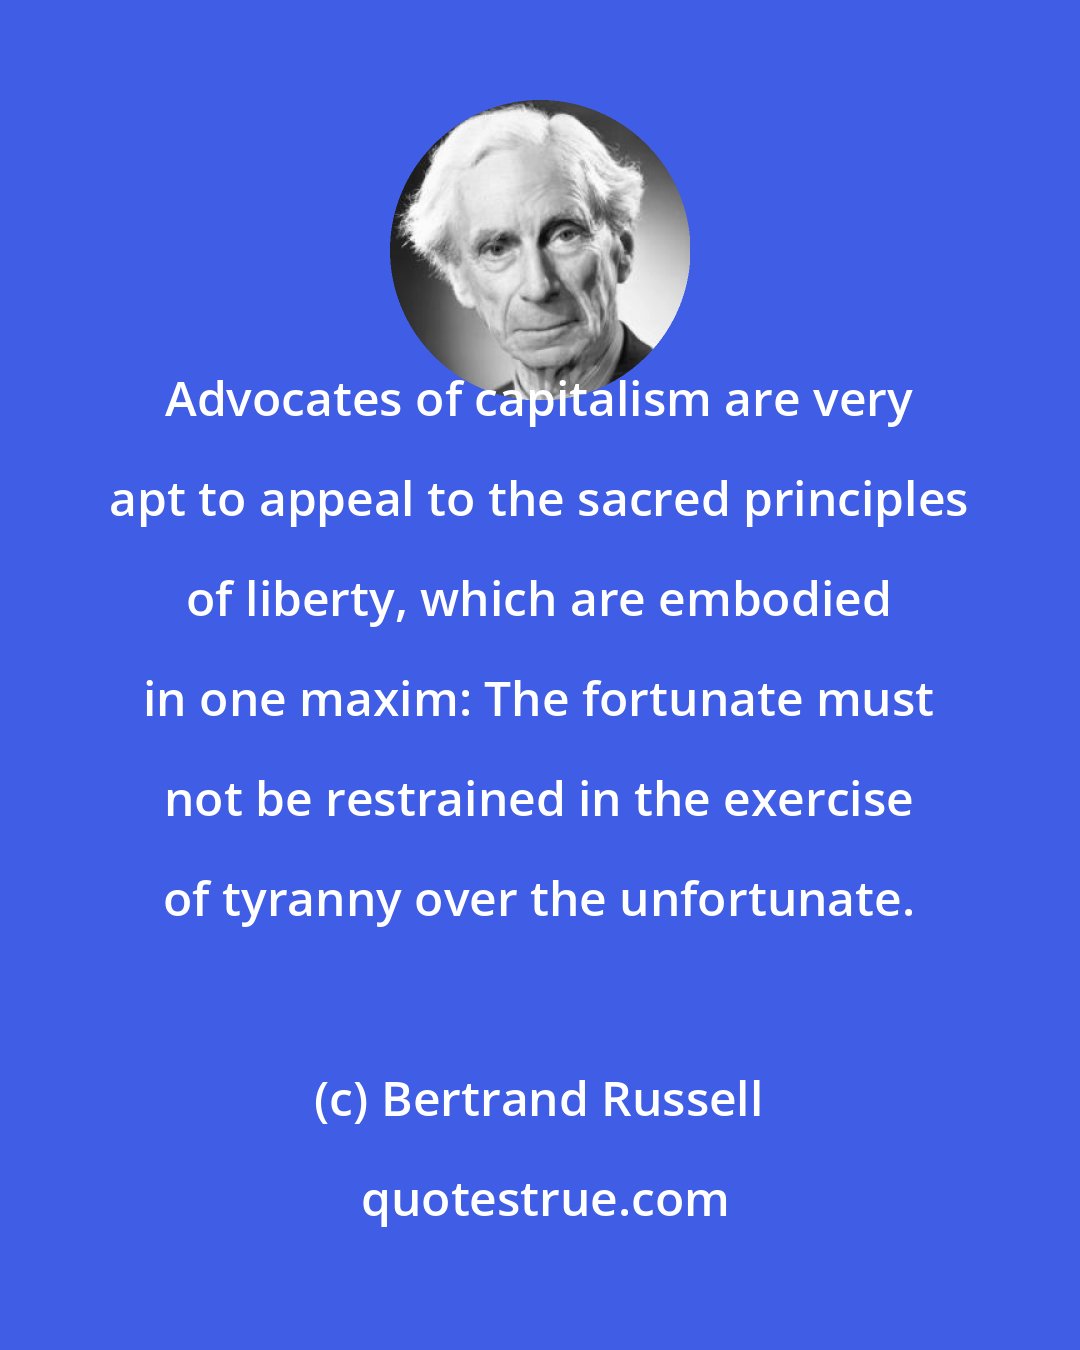 Bertrand Russell: Advocates of capitalism are very apt to appeal to the sacred principles of liberty, which are embodied in one maxim: The fortunate must not be restrained in the exercise of tyranny over the unfortunate.